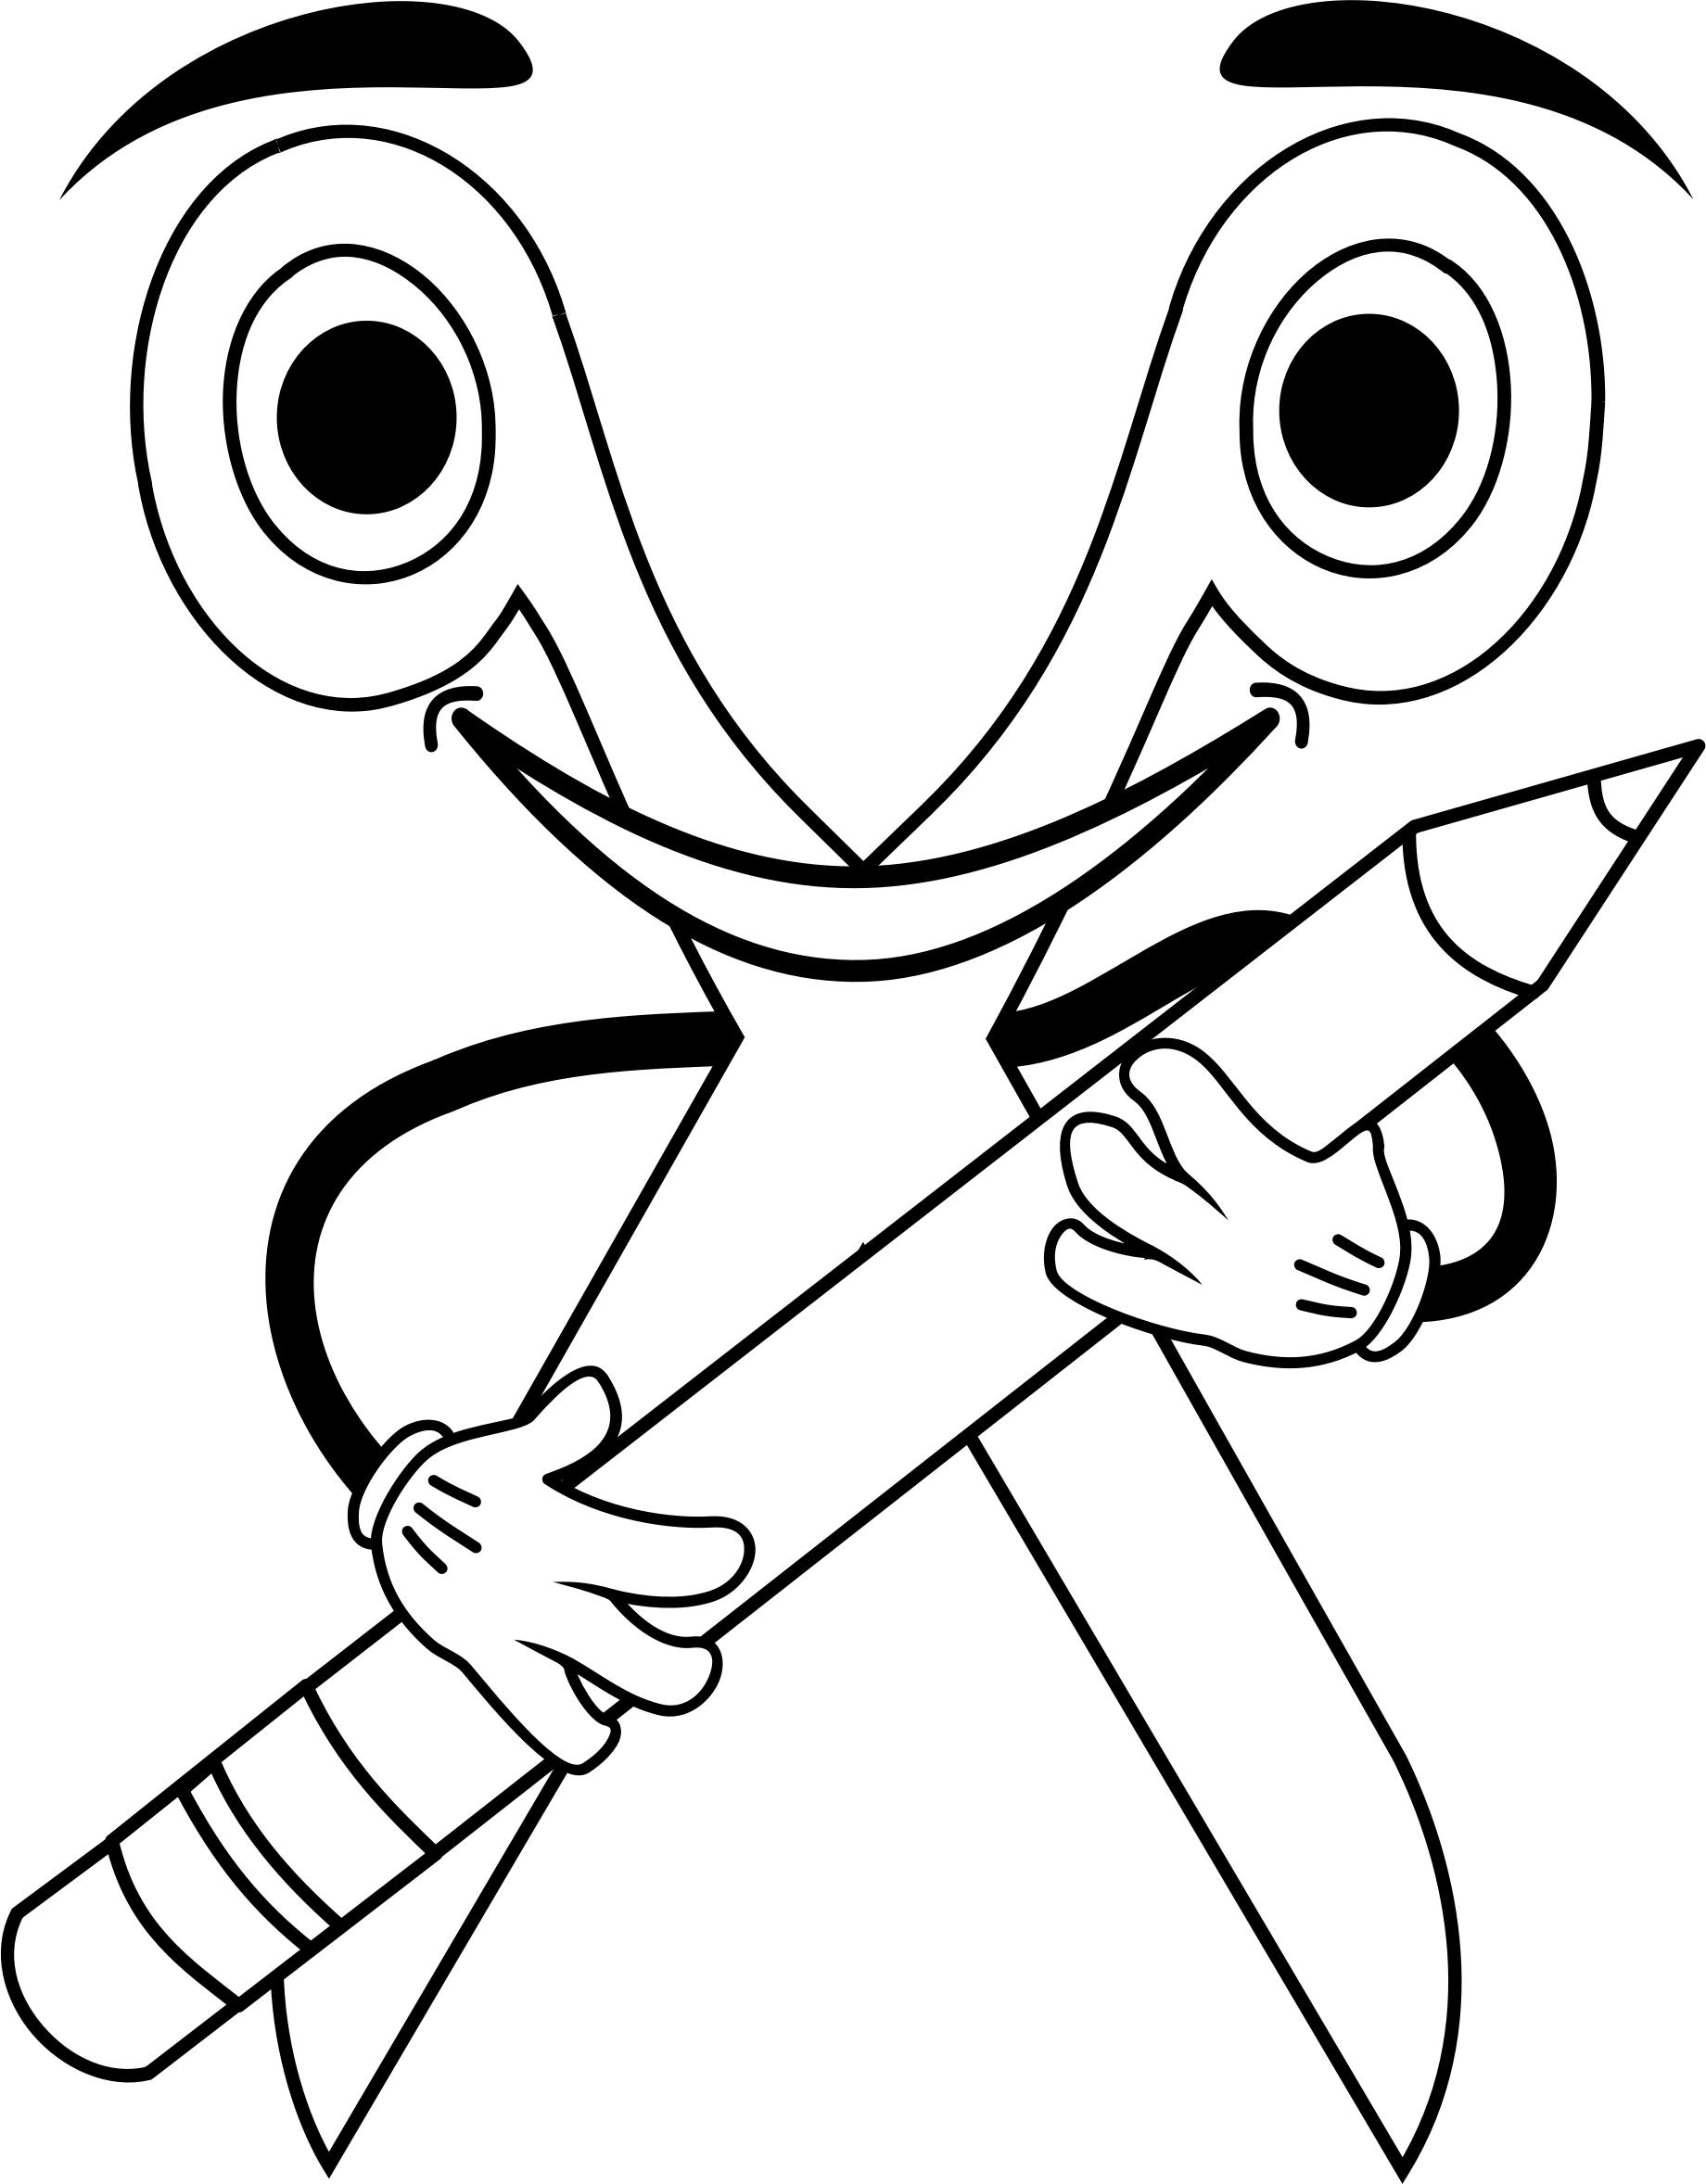 Openclipart Coloring Book Logo (not officially) png